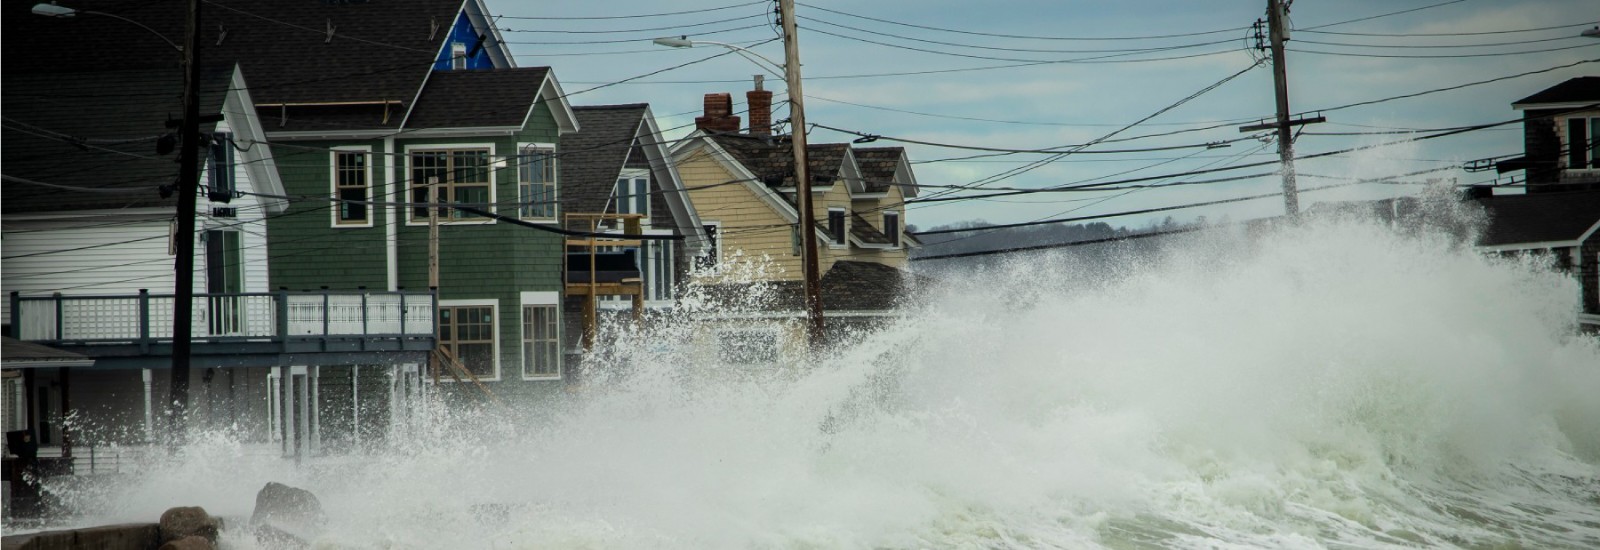 Much of the climate change adaptation research to date has focused on household-level responses to hazards like this 2019 storm surge that led to coastal flooding in southern Maine.